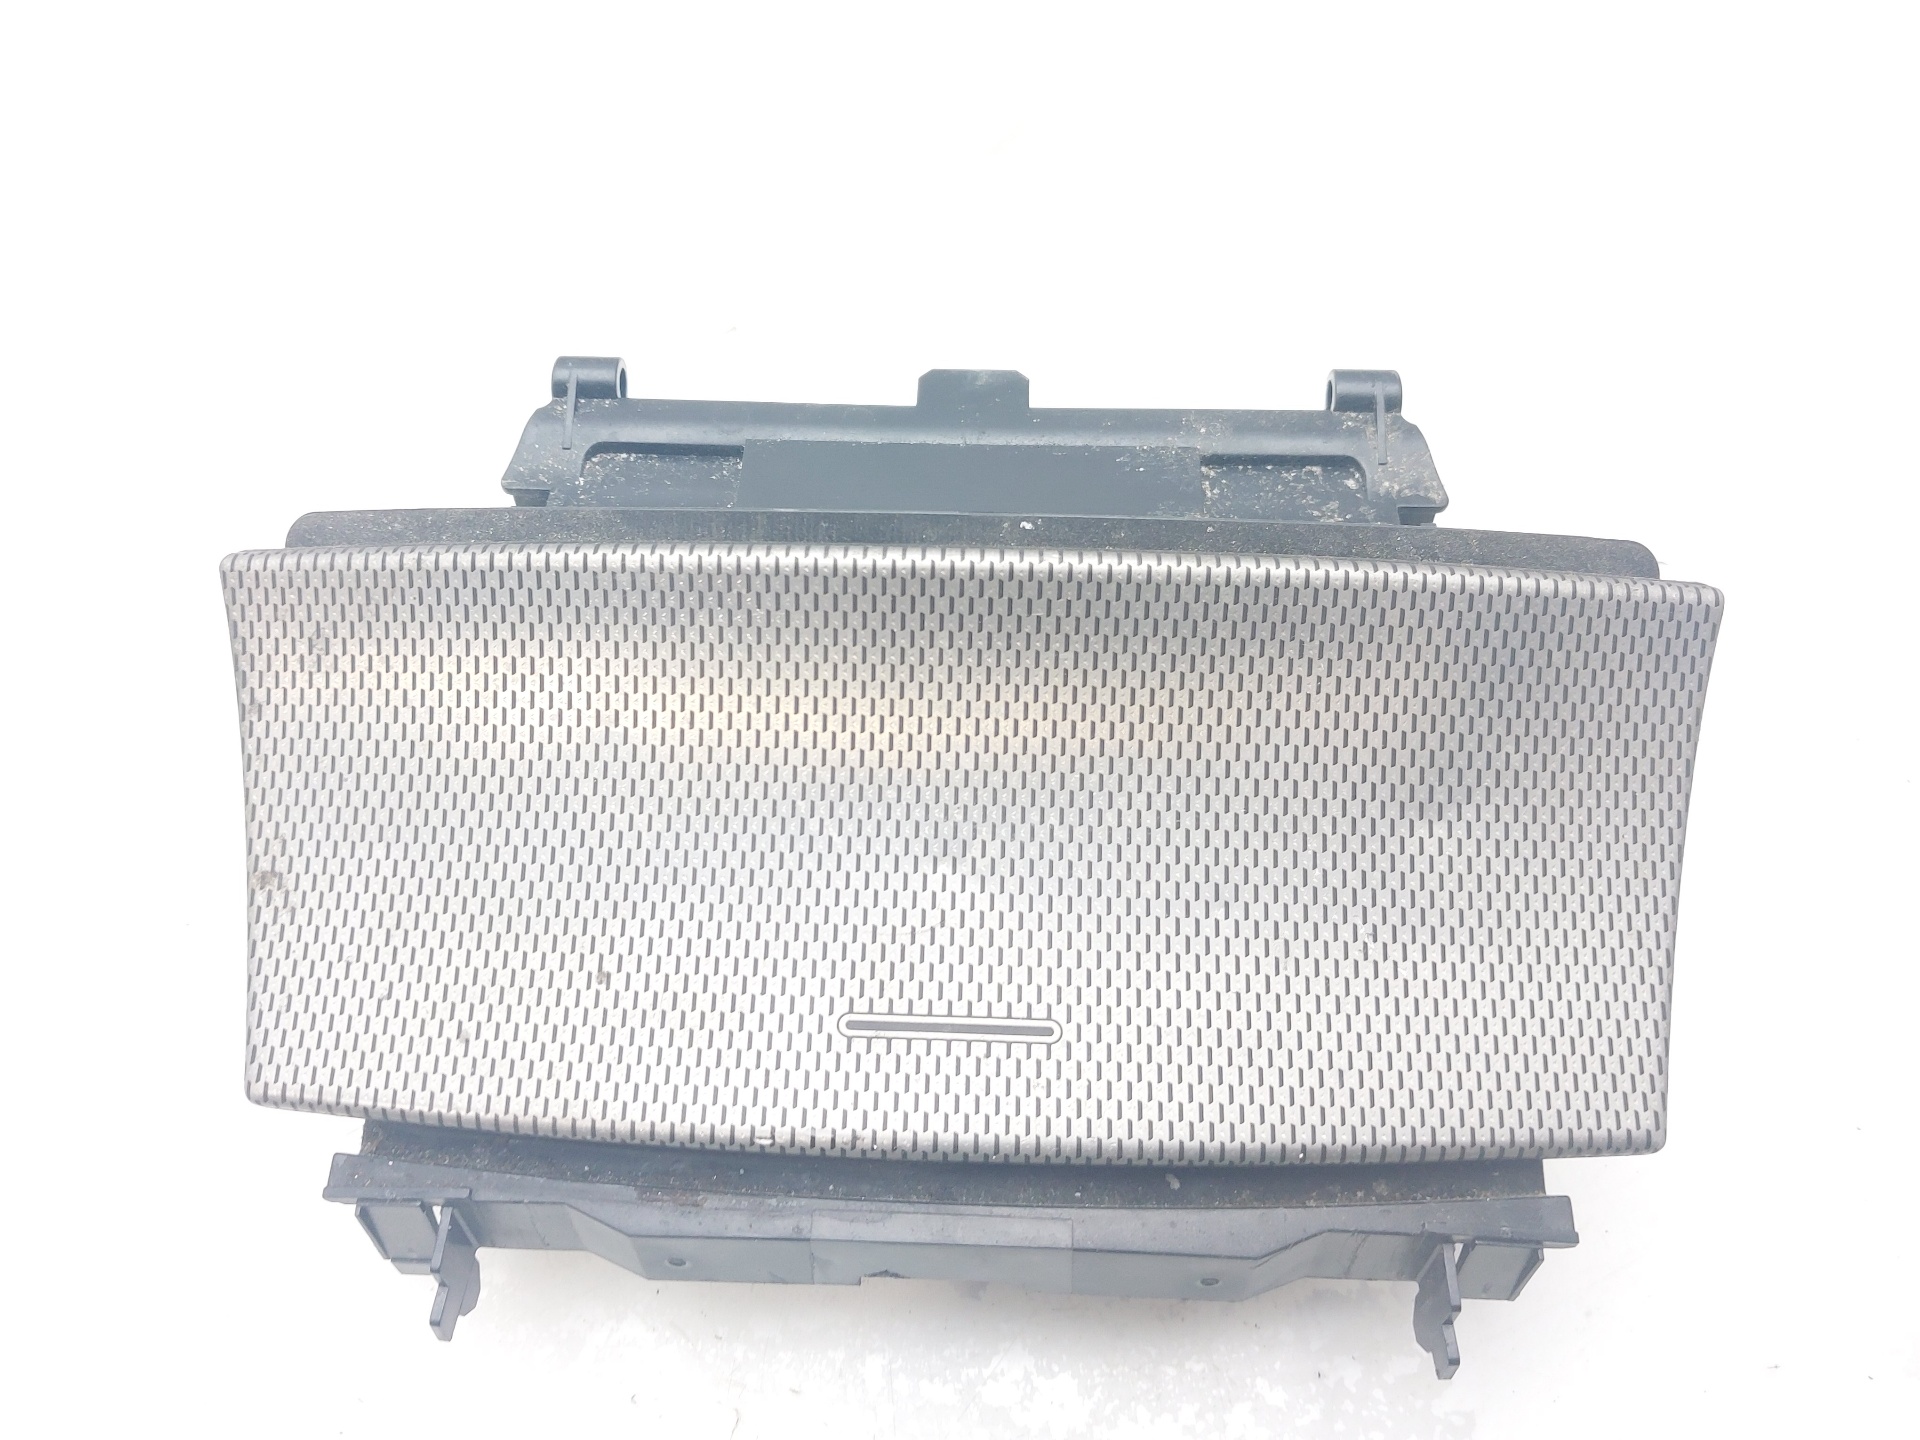 RENAULT C-Class W203/S203/CL203 (2000-2008) Ashtray A2036800852 21089217